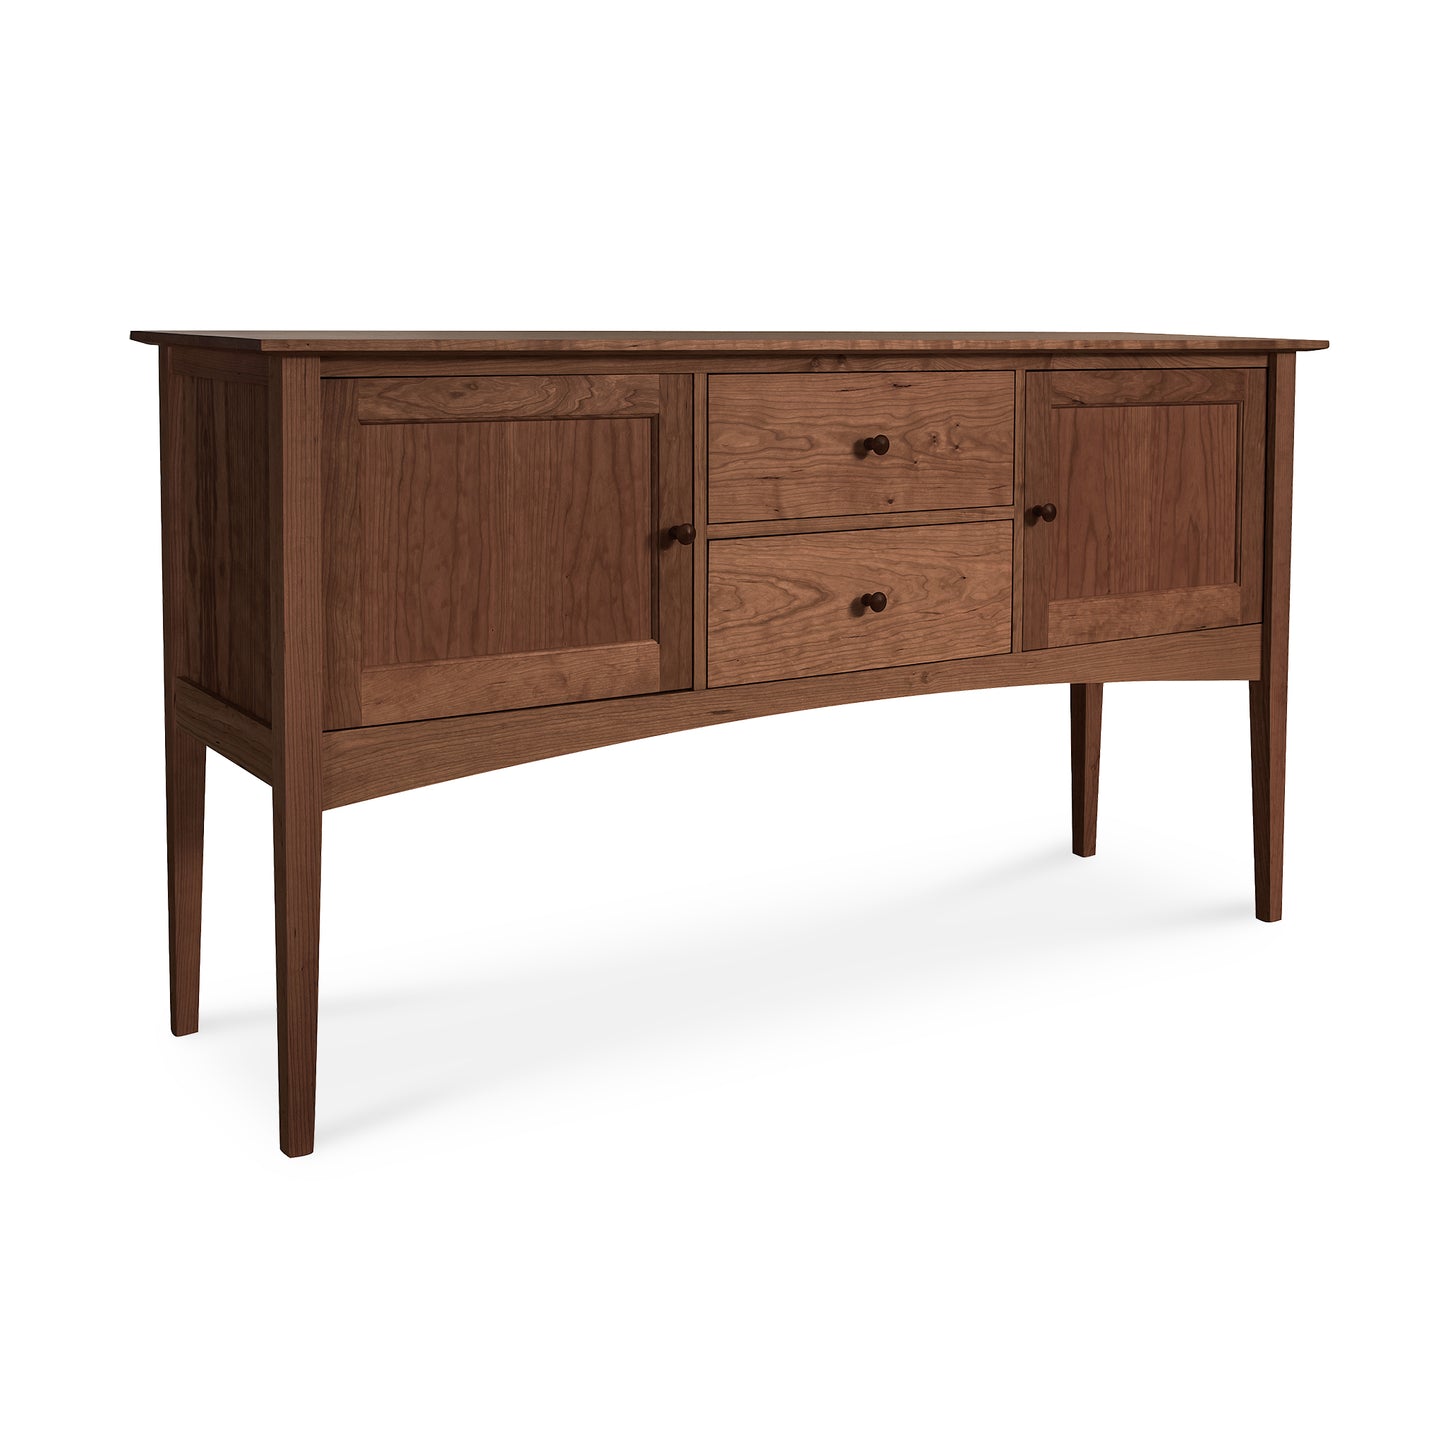 This American Shaker Hunt Board from Maple Corner Woodworks embodies the timeless elegance of shaker design, showcasing exquisite craftsmanship and high-quality materials. It features two spacious drawers for convenient storage.